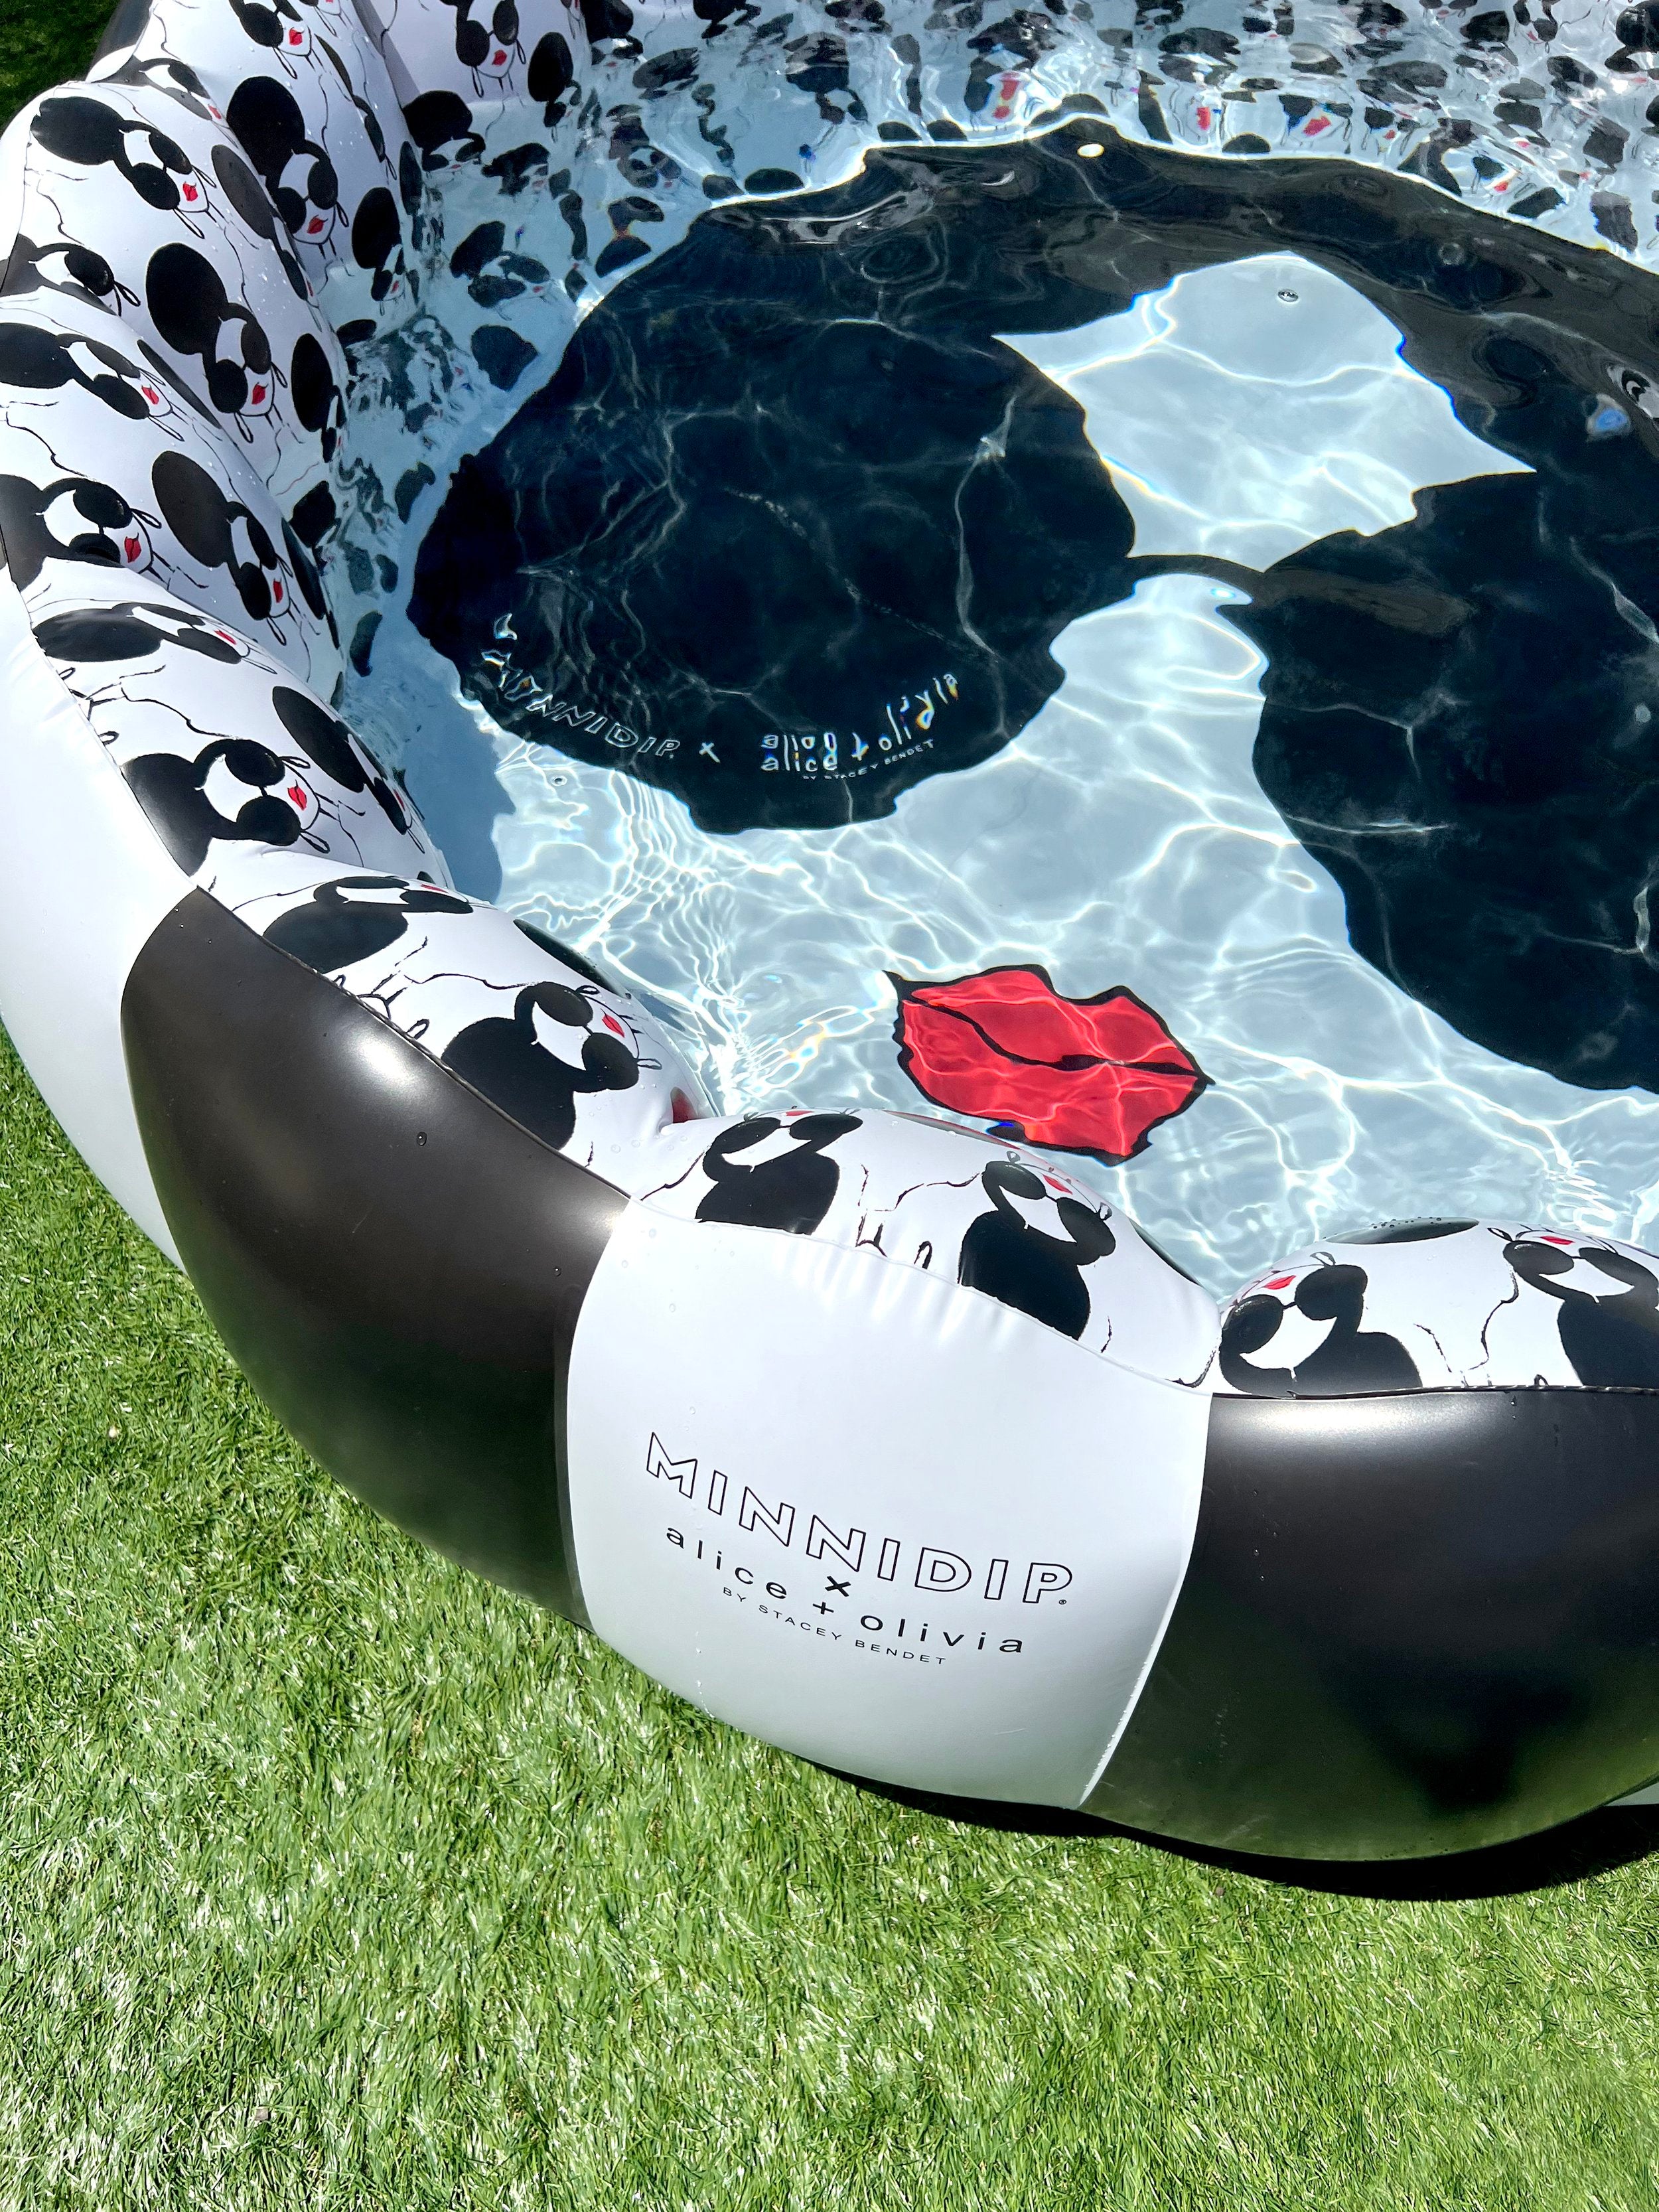 the MINNIDIP x ALICE + OLIVIA Tufted Luxe Inflatable Pool